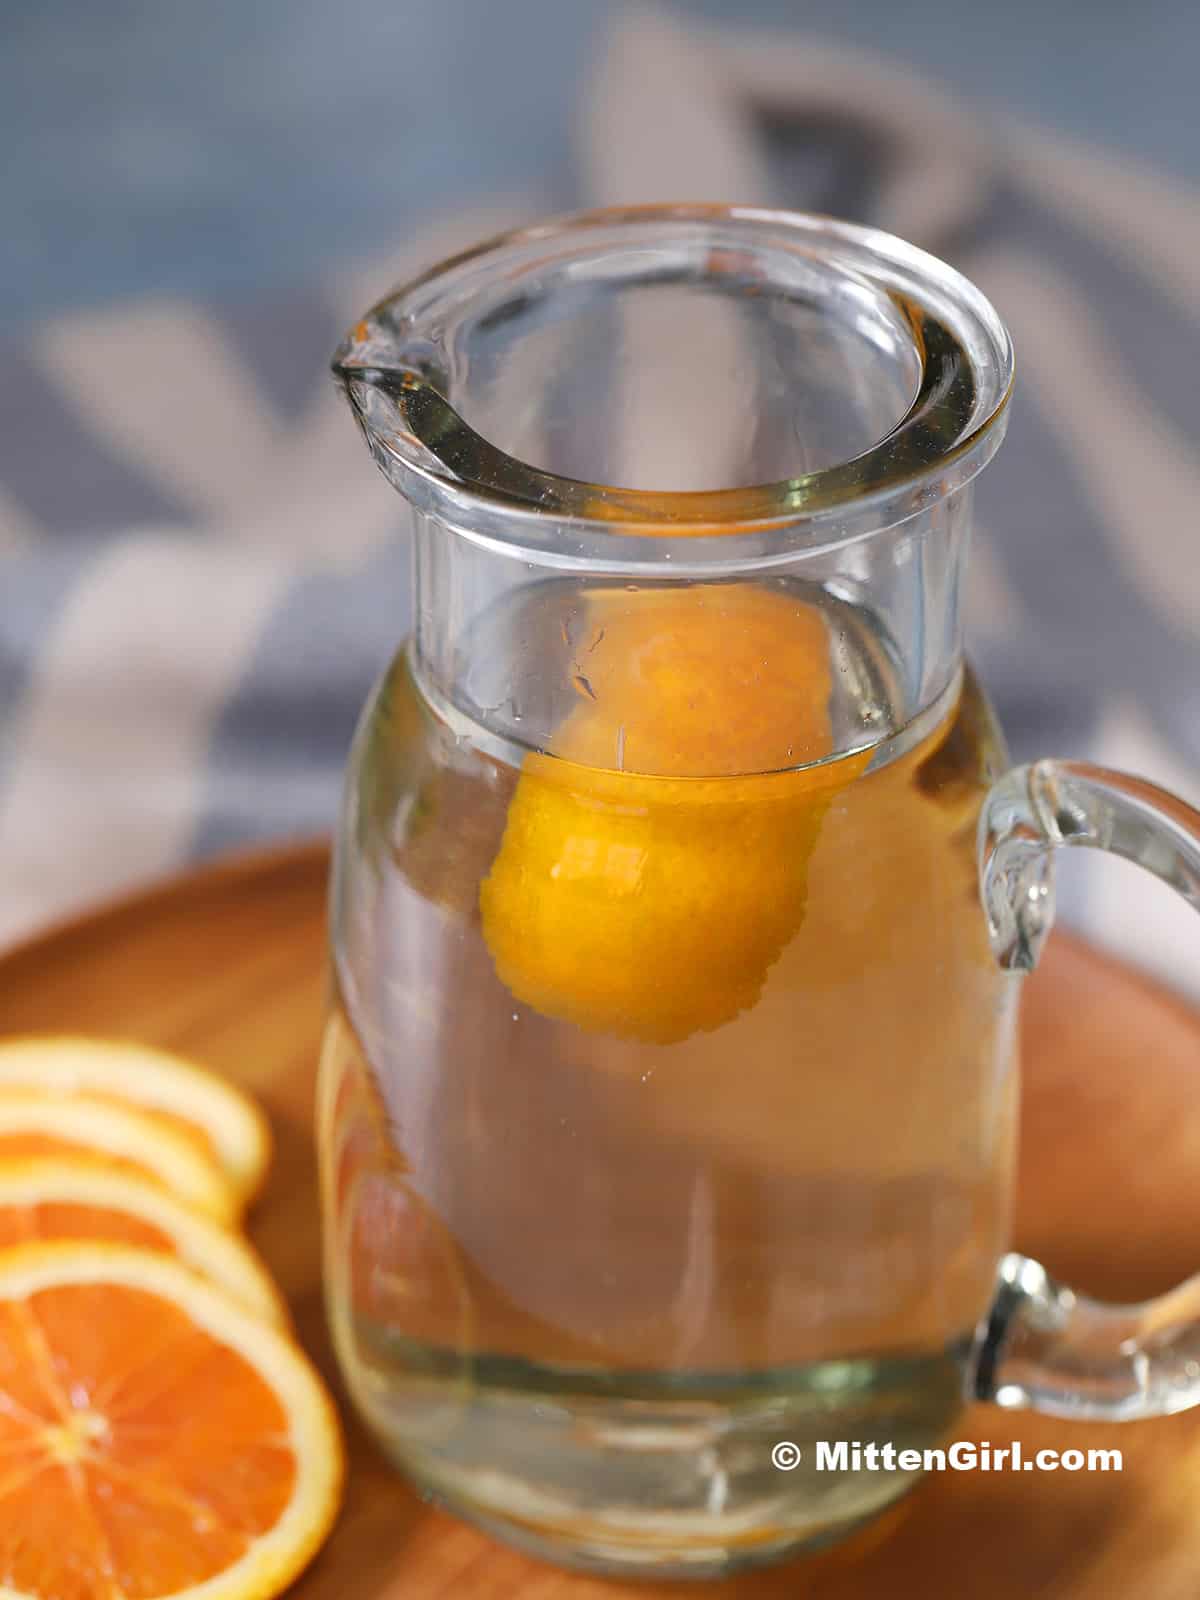 A pitcher of orange syrup.